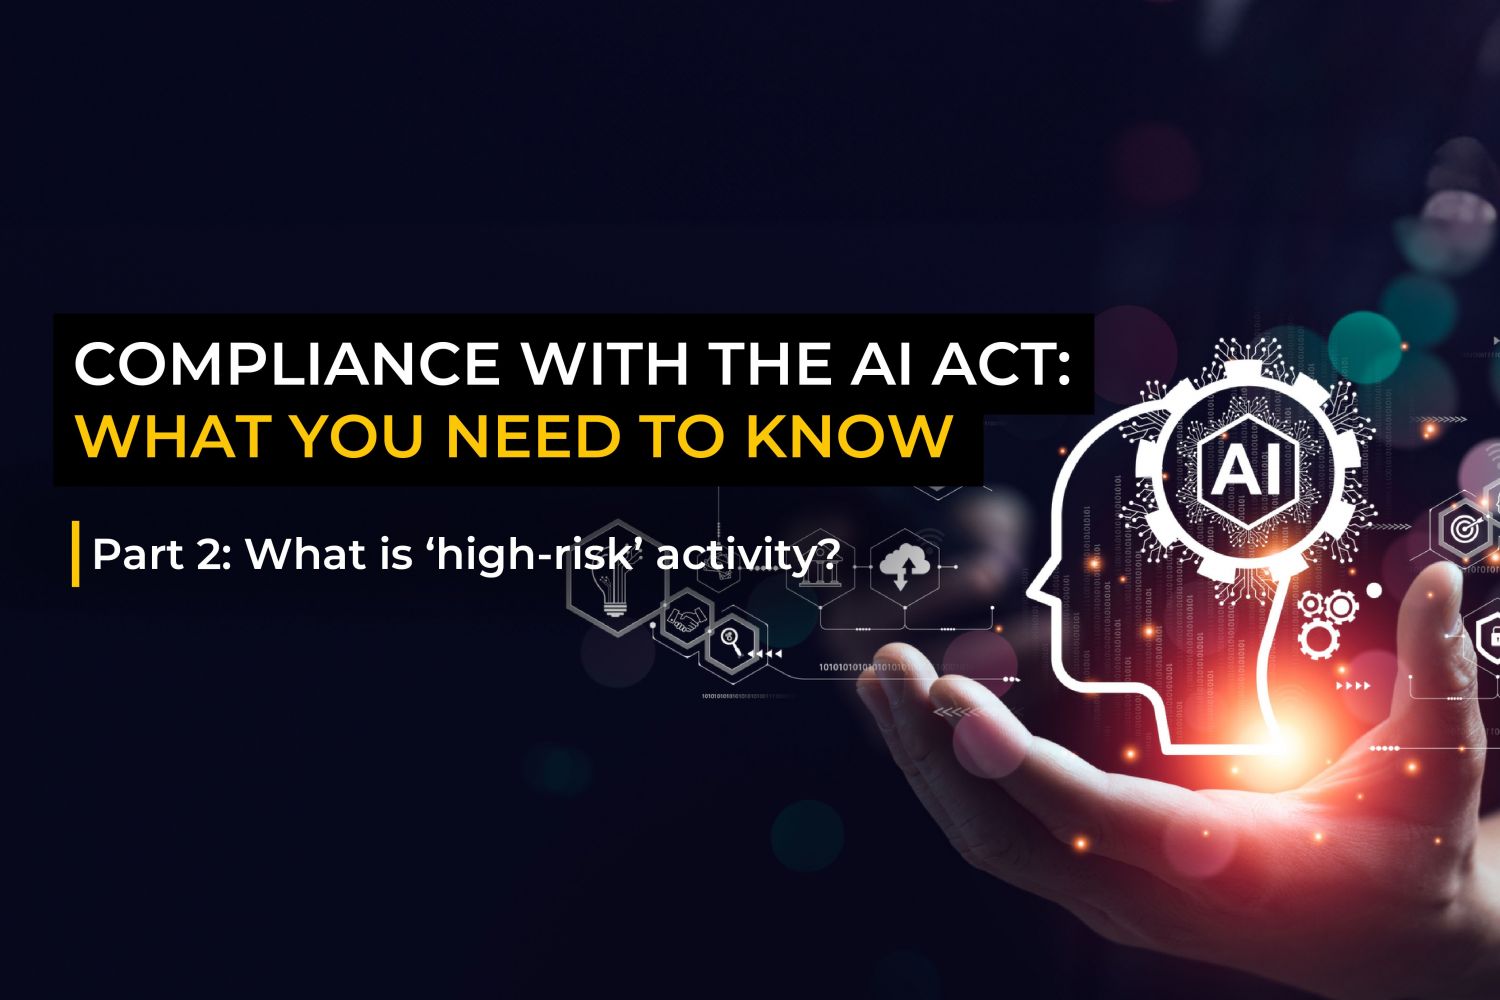 Compliance with the AI Act part 2: What is ‘high risk’ activity?